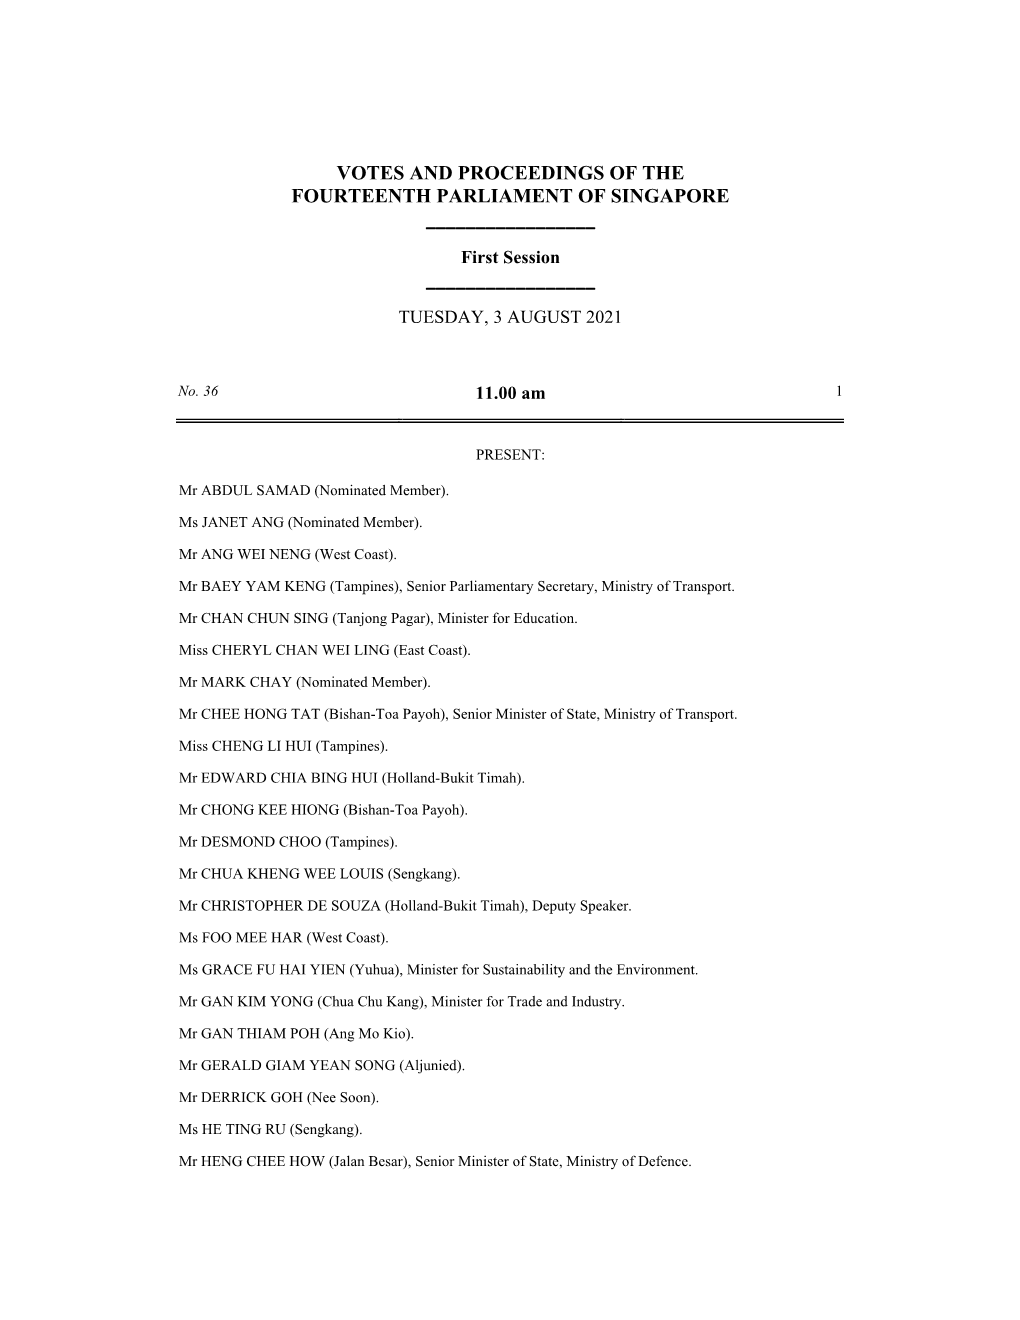 Votes and Proceedings of the Fourteenth Parliament of Singapore ______